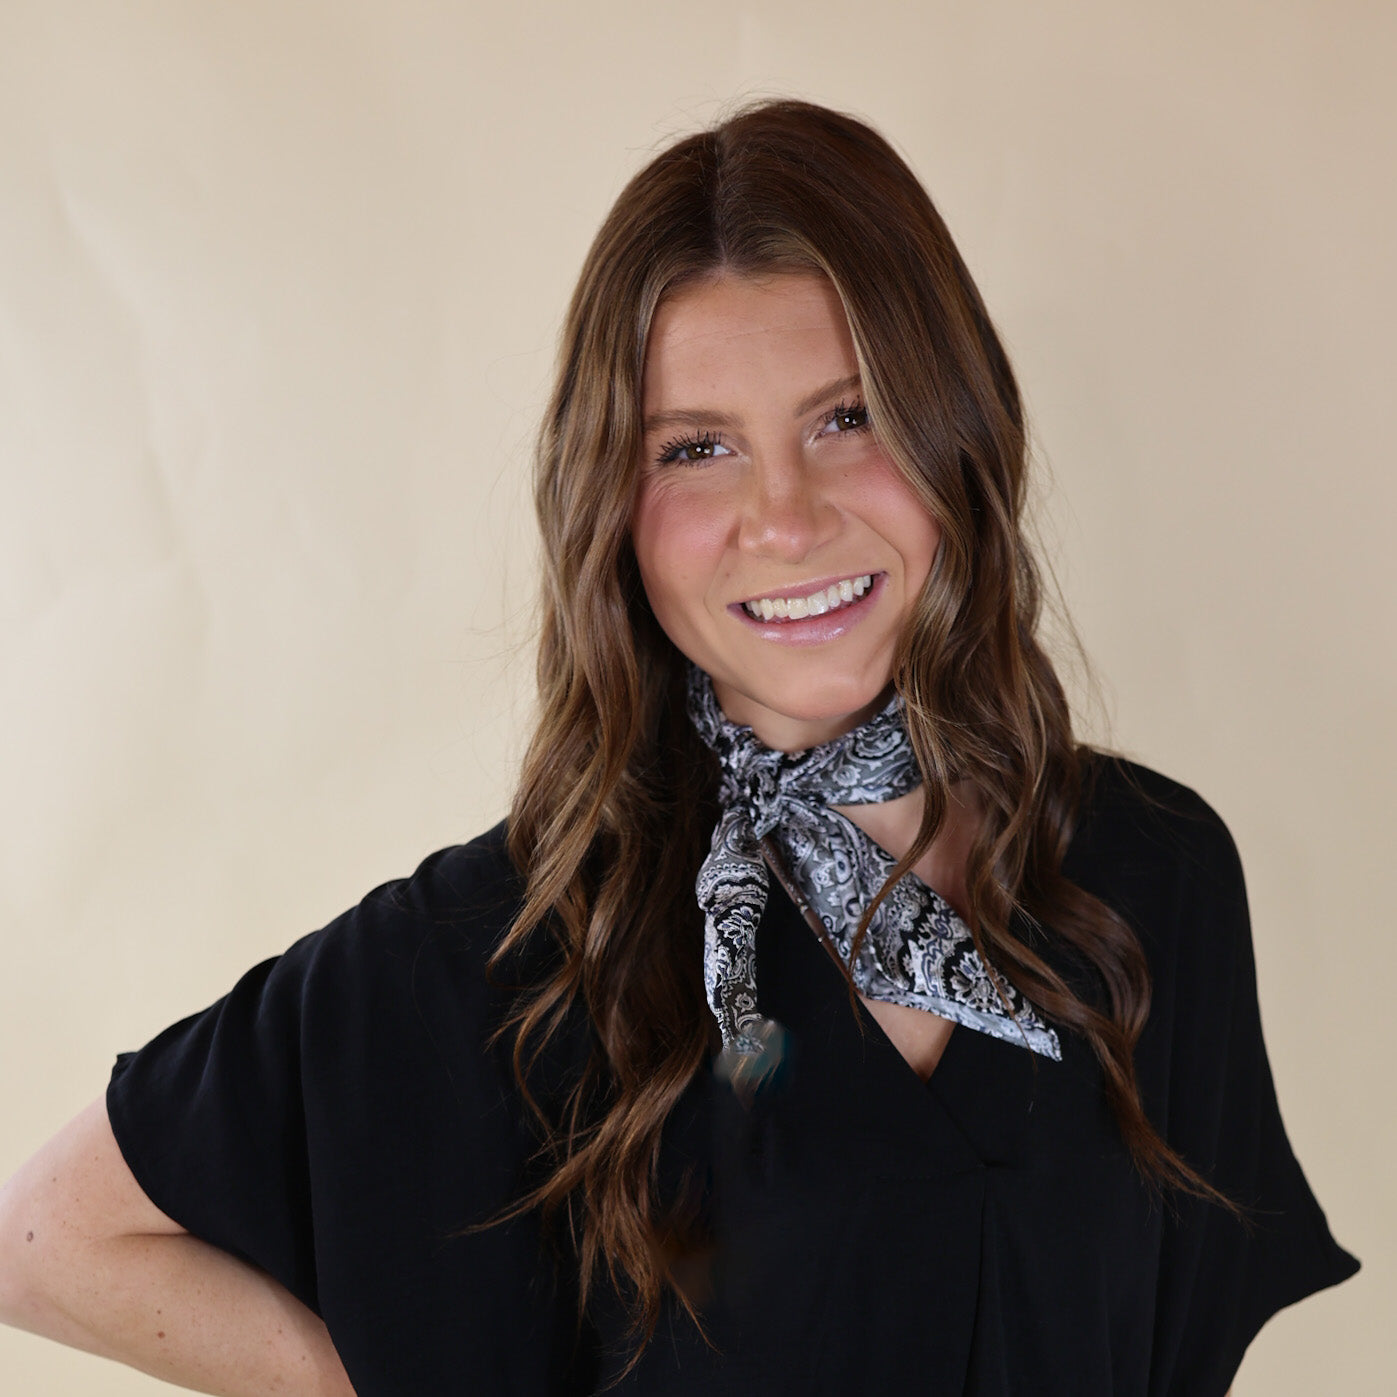 Brunette model wearing a black, drop shoulder top with Black and Silver scarf tied around her neck. Model is pictured in front of a beige background.